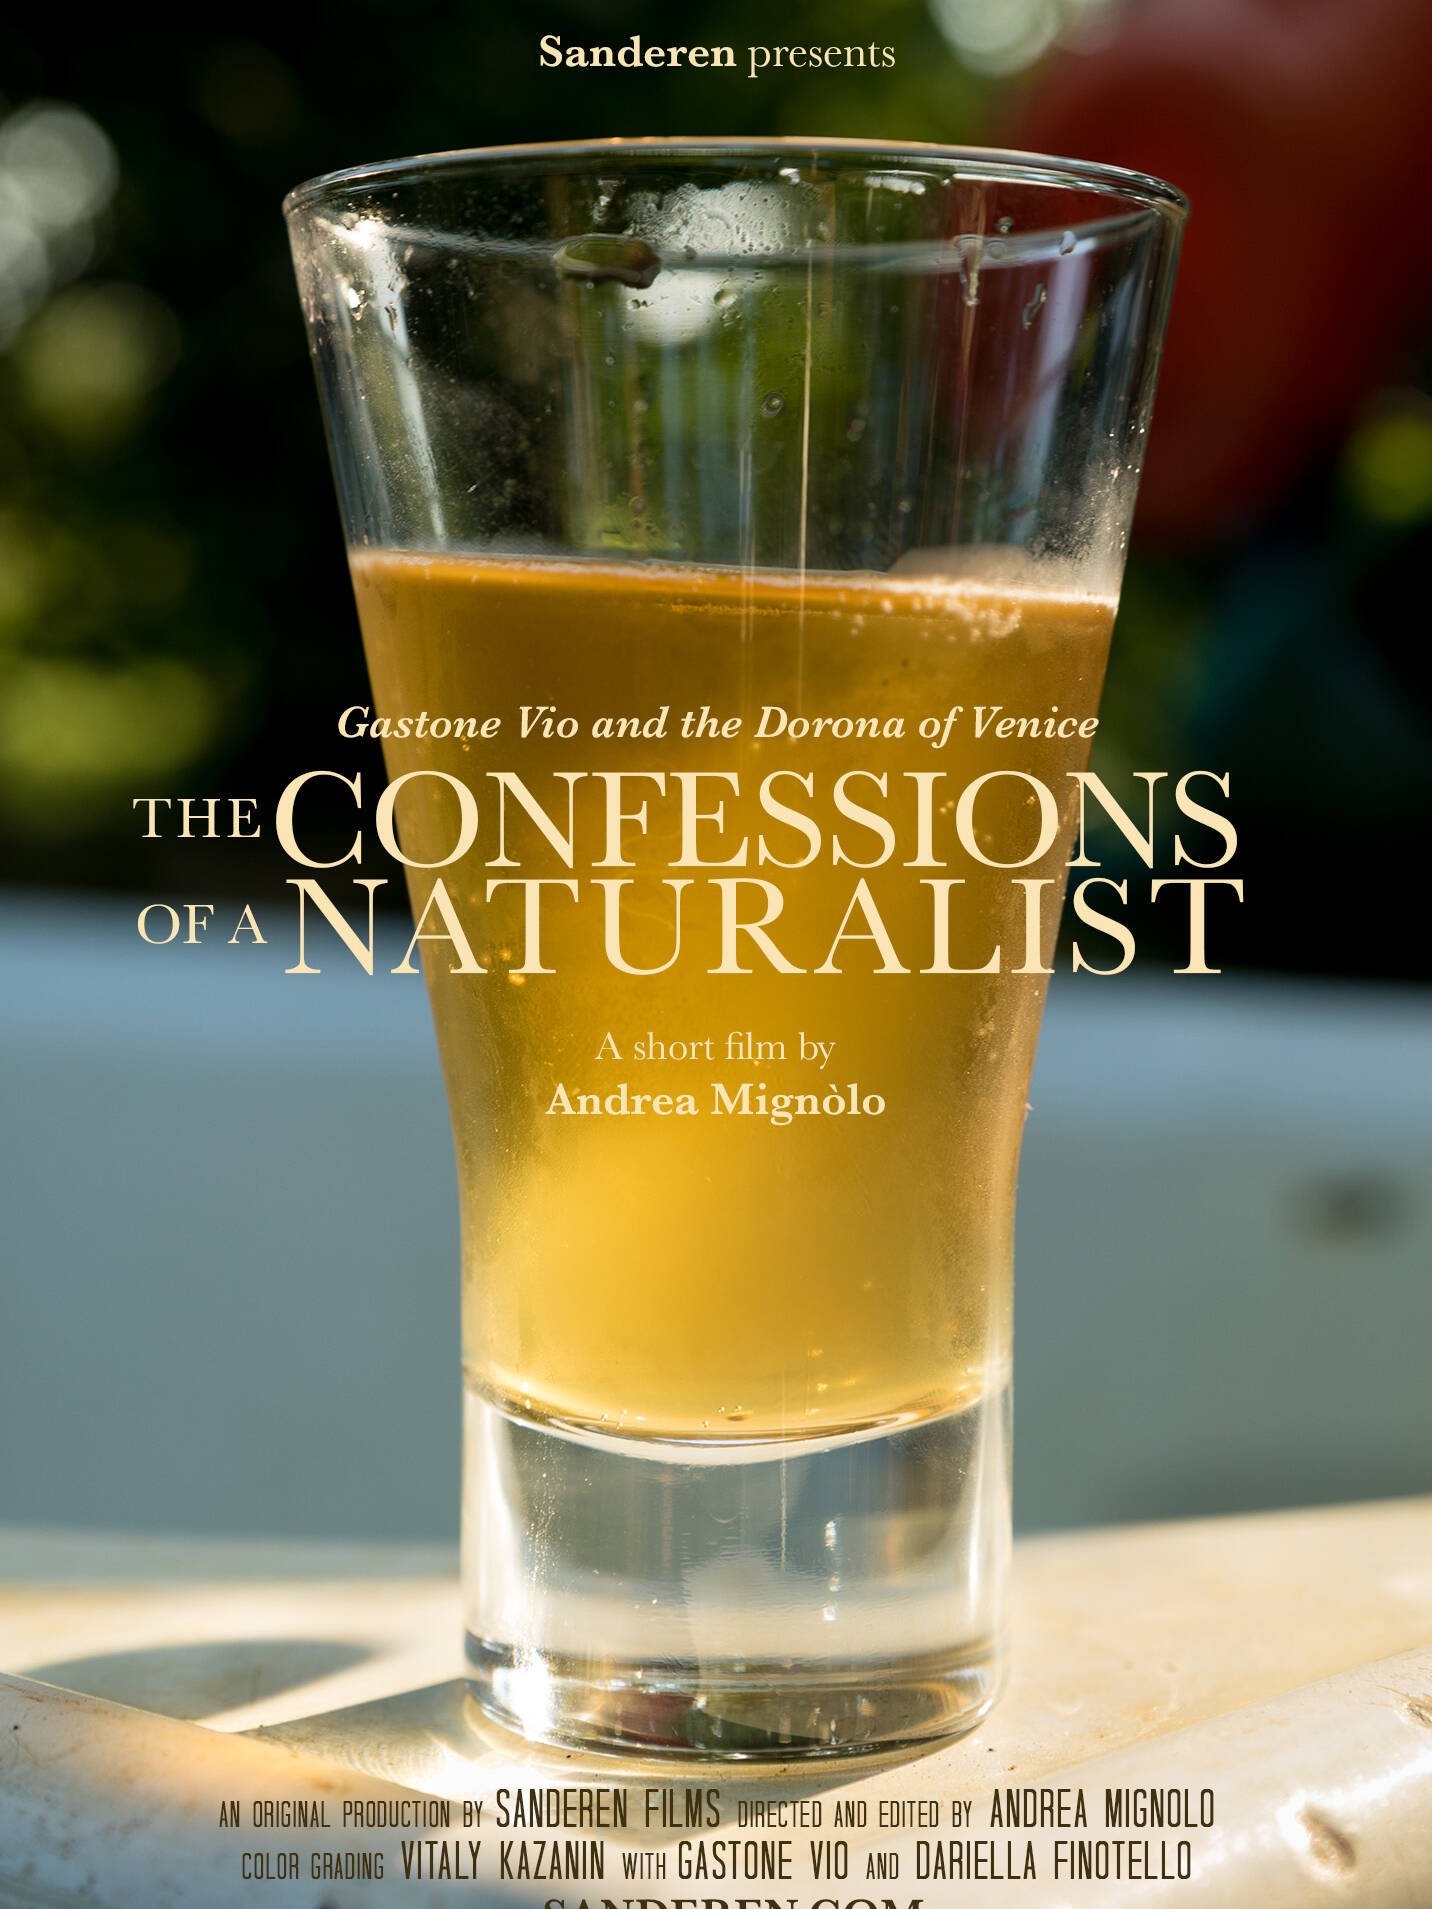 The Confessions of a Naturalist poster -A film by Andrea Mignolo with Gastone Vio